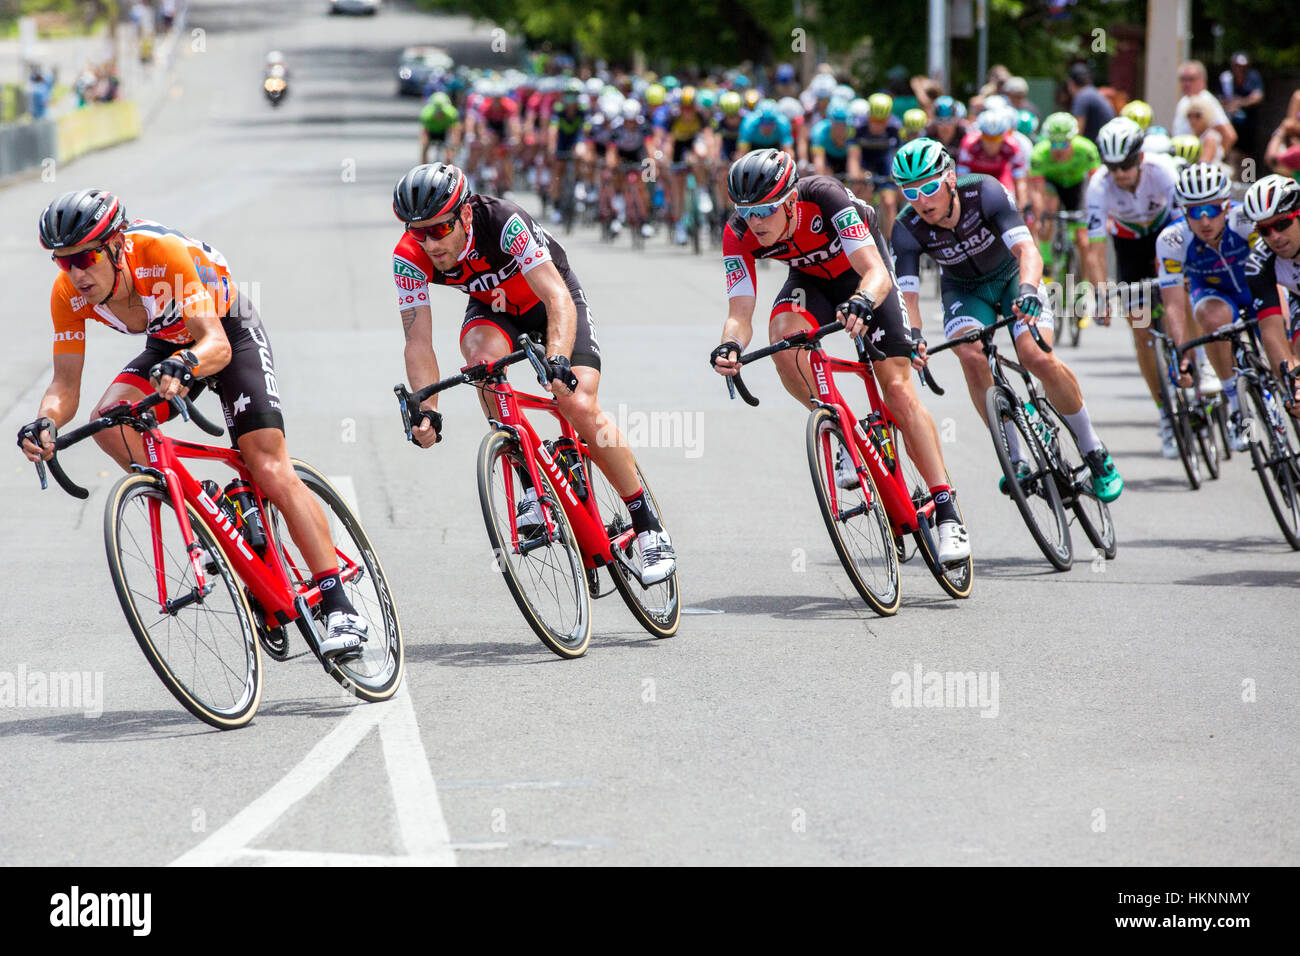 Richie Porte (AUS) from the BMC Racing Team leads a group of riders during stage 6 of the 2017 Tour Down Under through the streets of Adelaide Austral Stock Photo